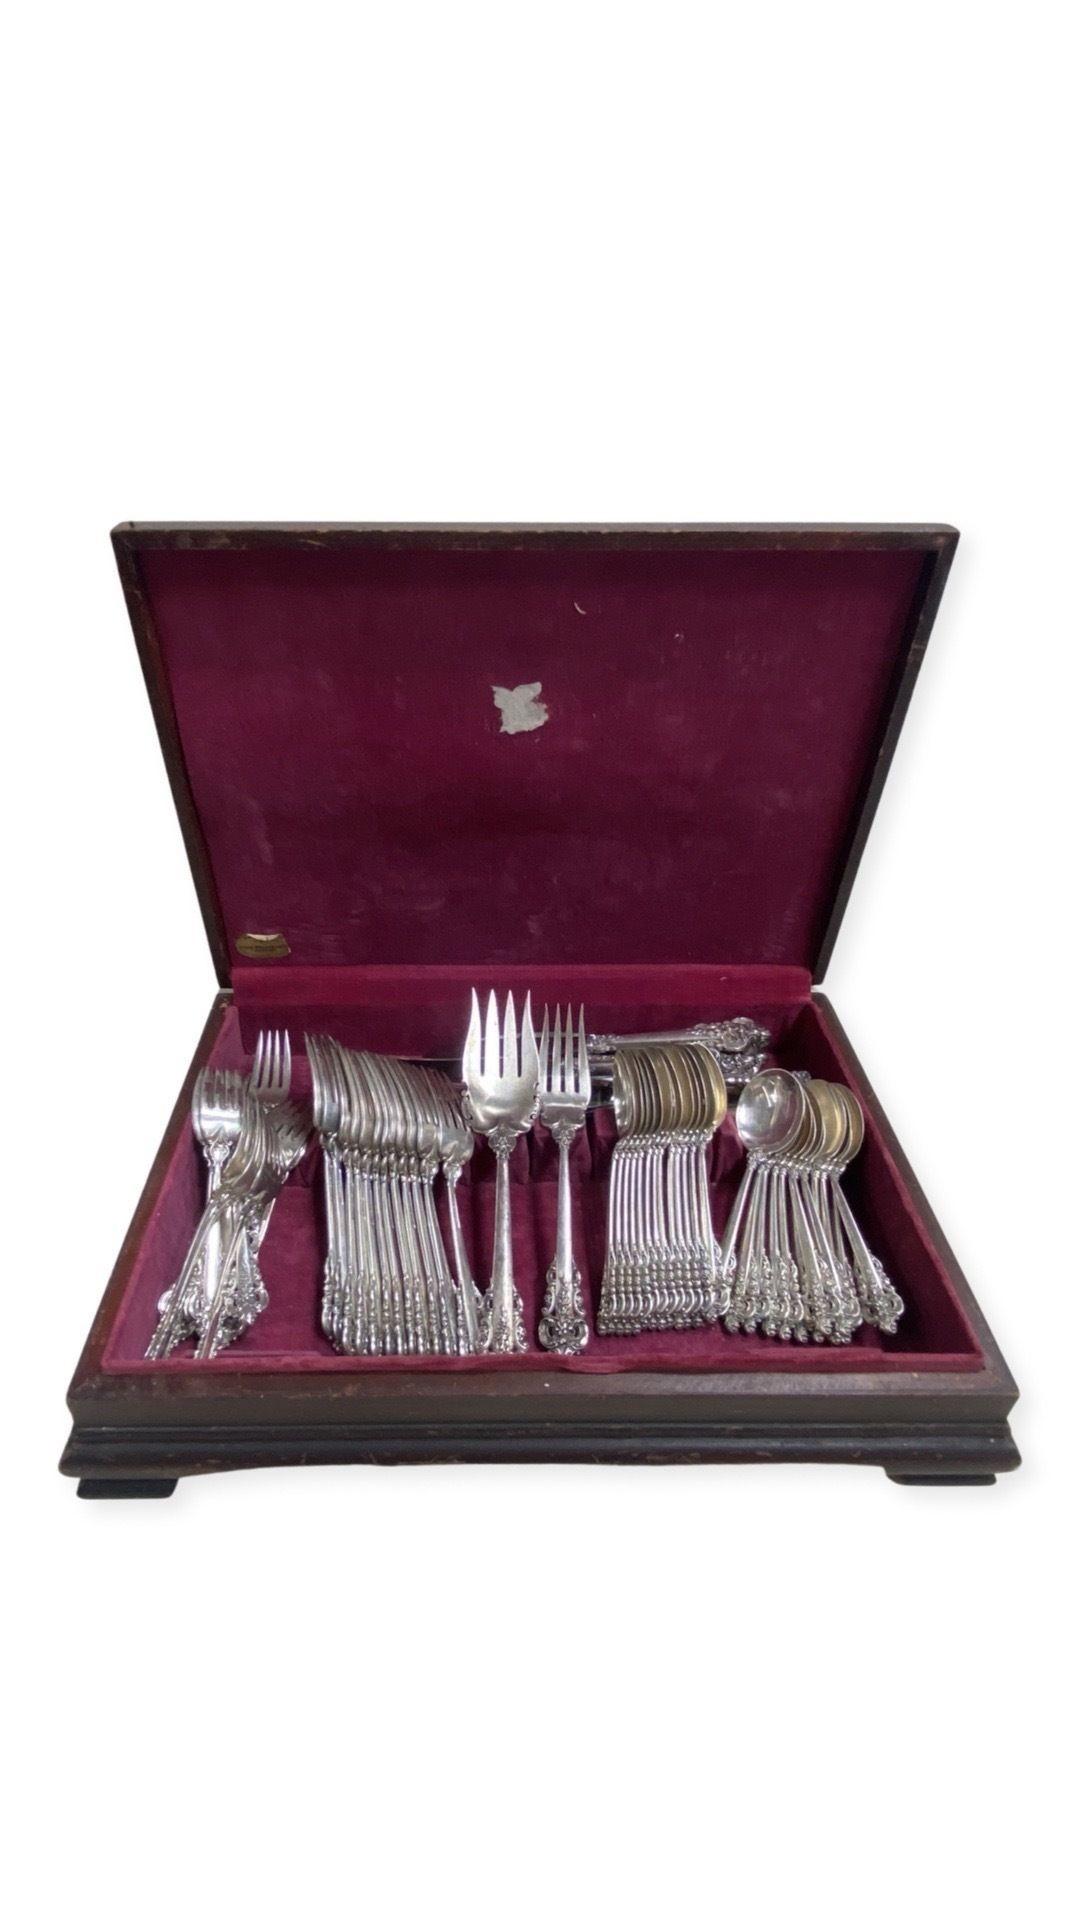 First produced in 1941, the design of Wallace Grande Baroque silverware was created by William S. Warren to celebrate the art of the Baroque period. In designing grande baroque flatware, silversmith warren drew upon his knowledge of Renaissance and